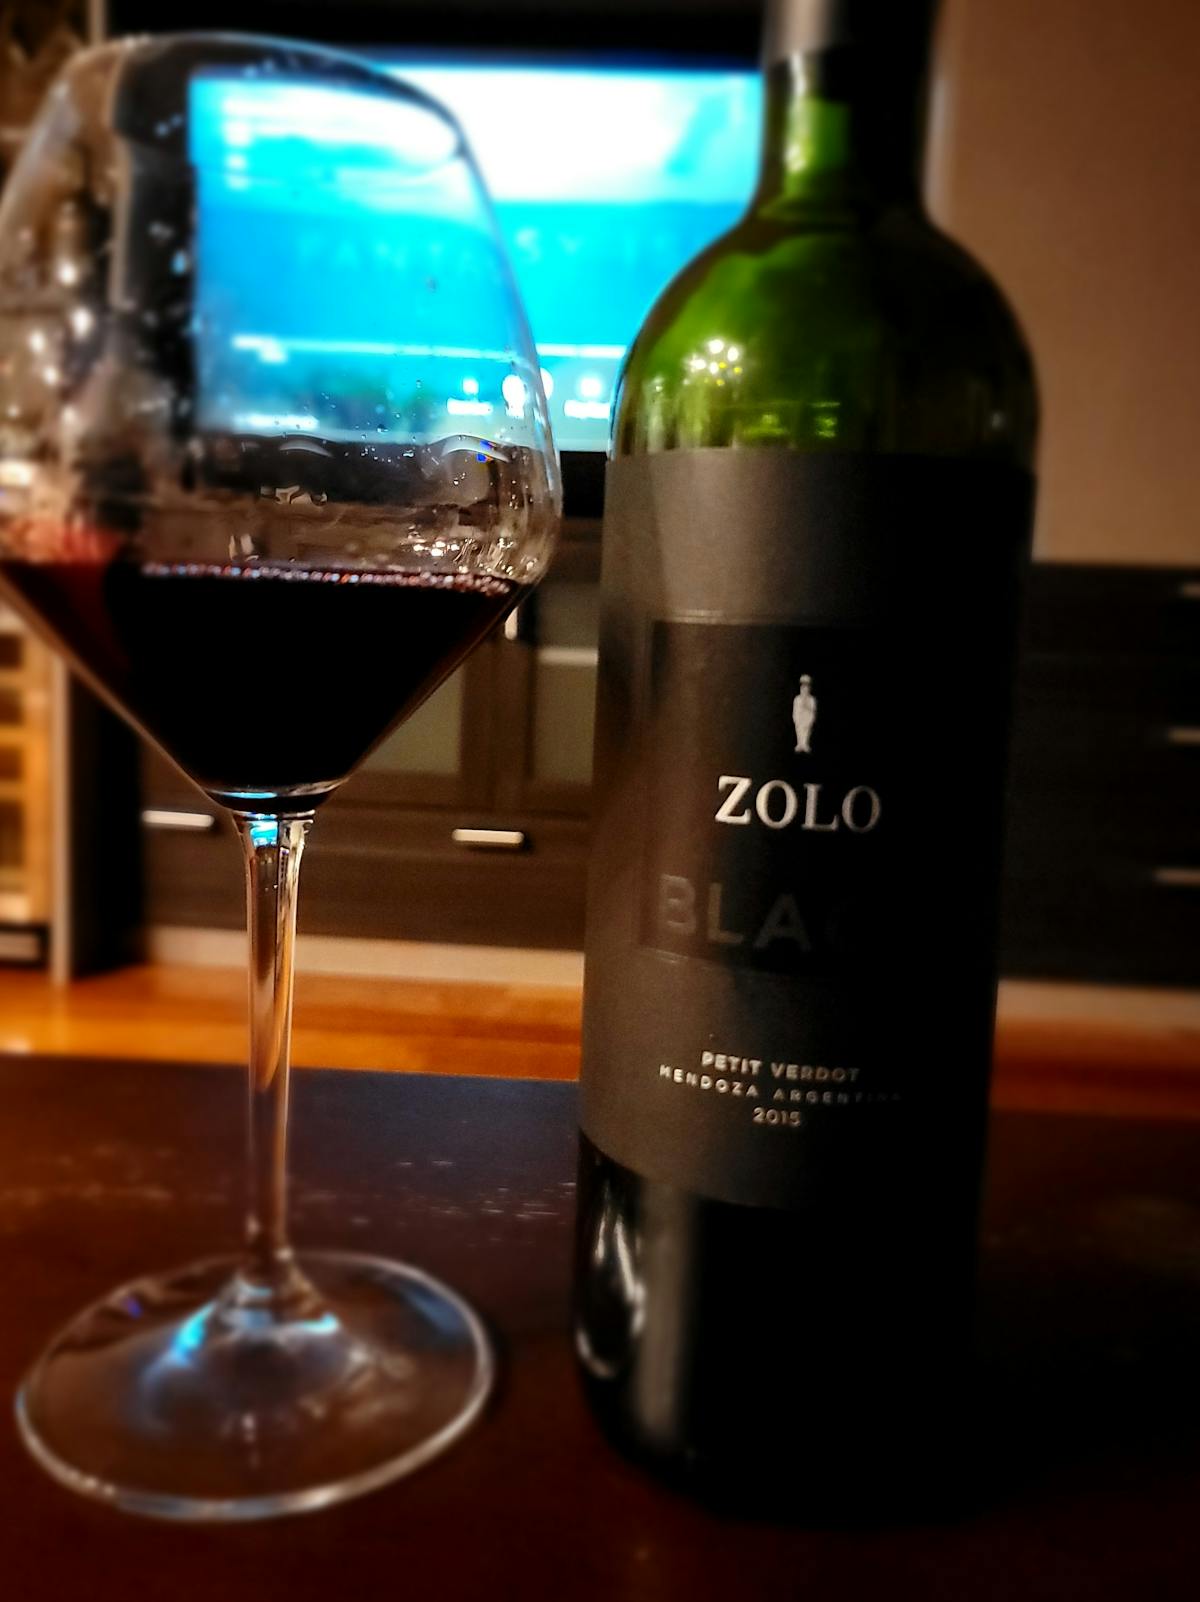 a close up of a bottle and a glass of zolo black petit verdot wine